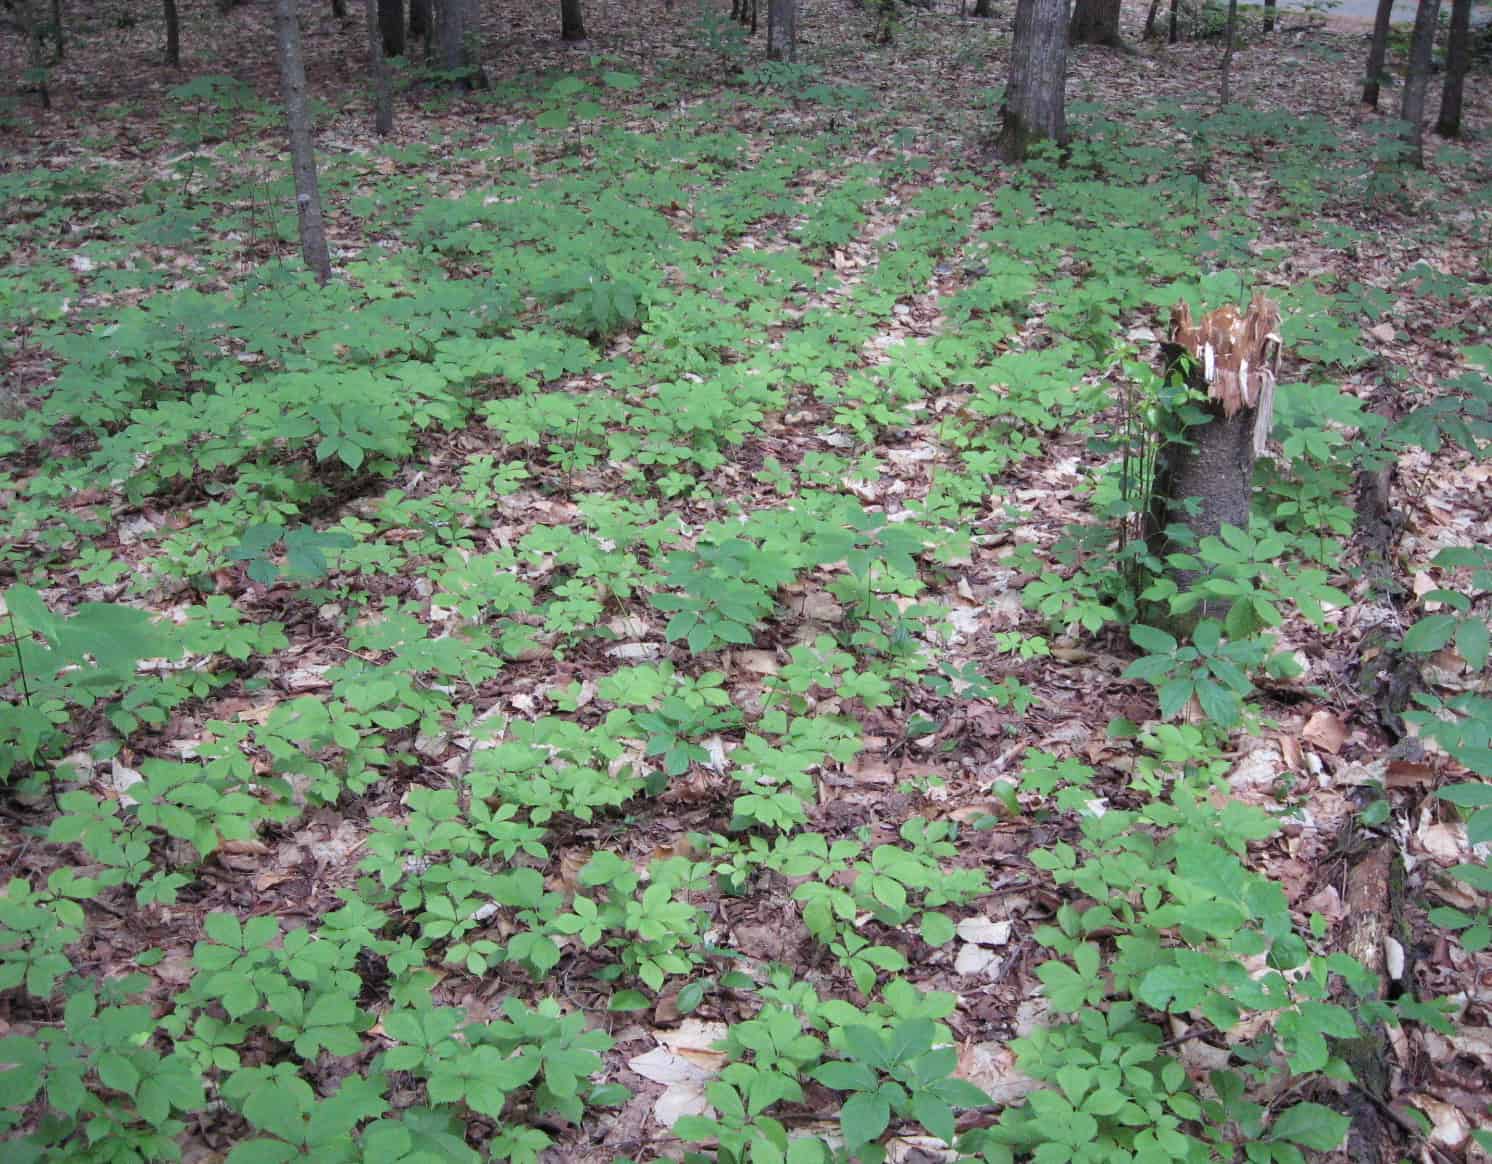 An established patch of intensive woods cultivated ginseng.